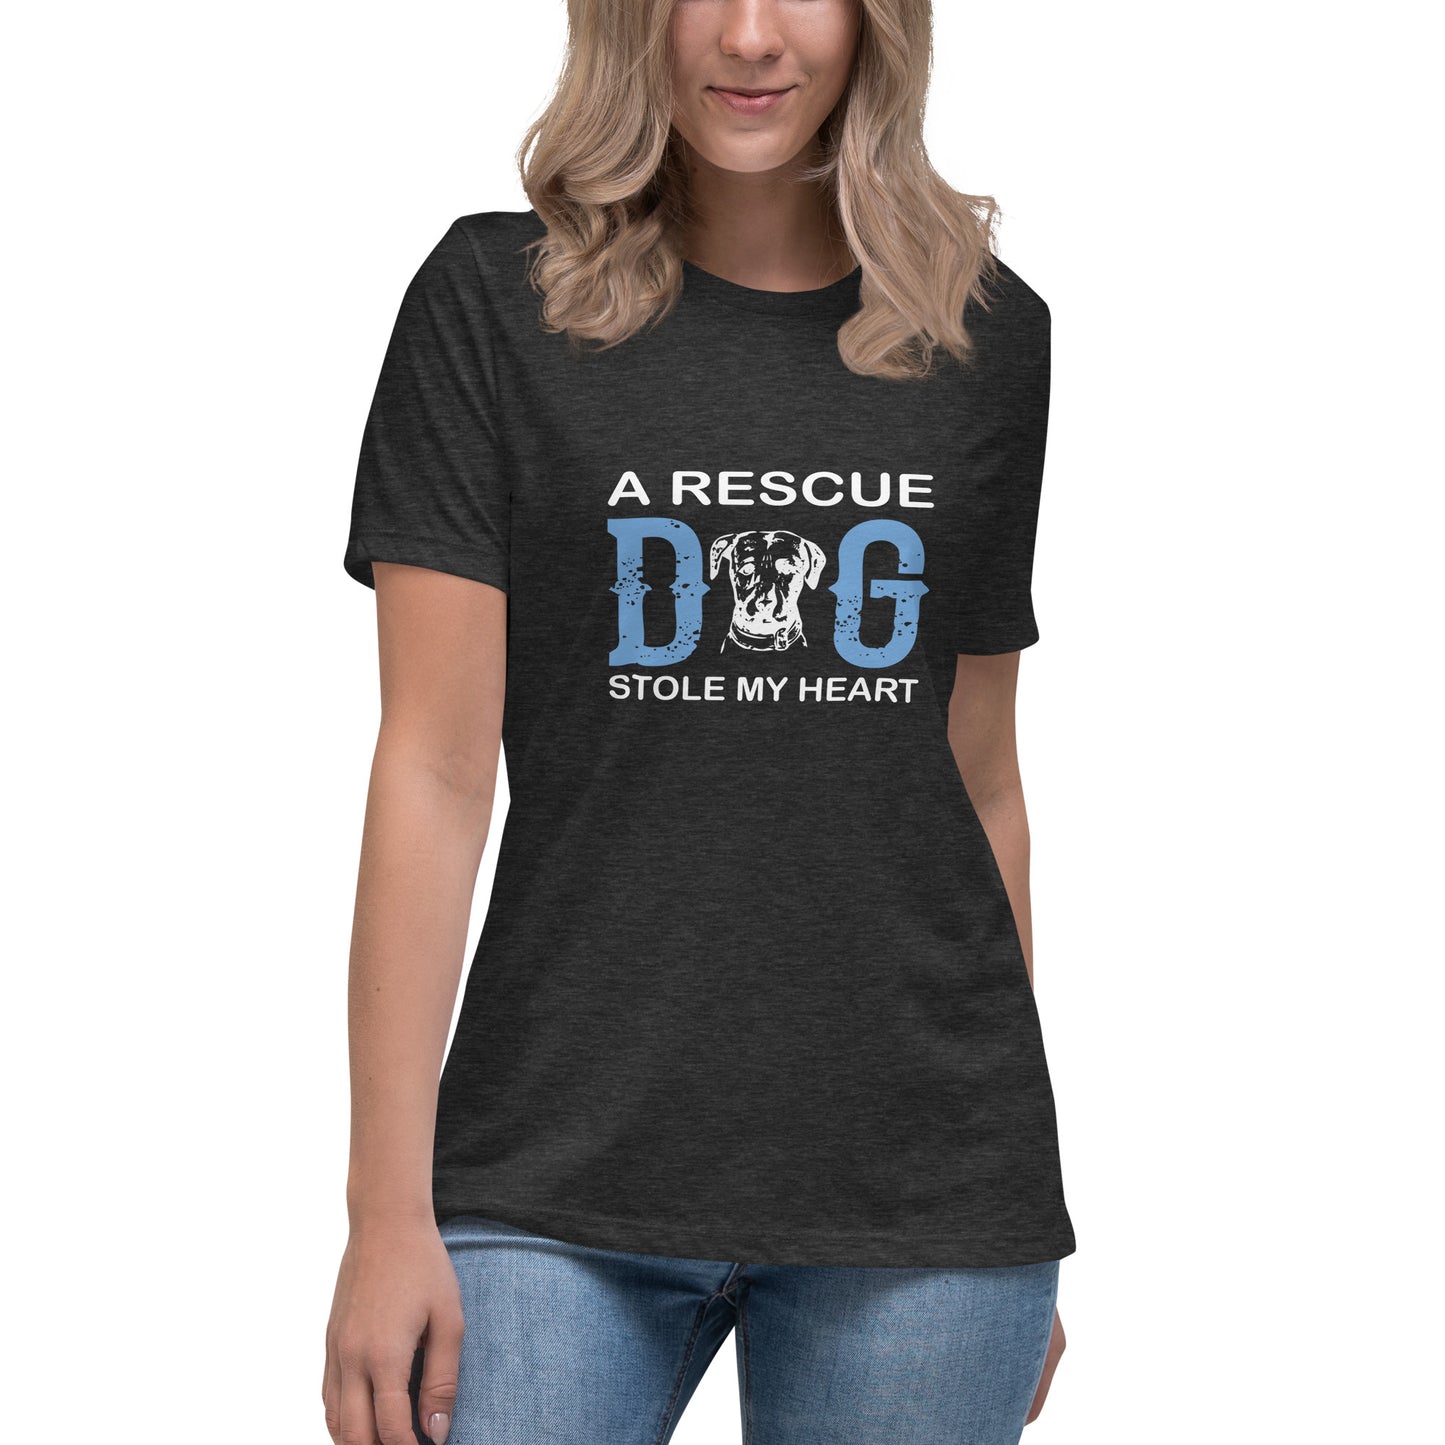 Women's Relaxed T-Shirt A RESCUE DOG